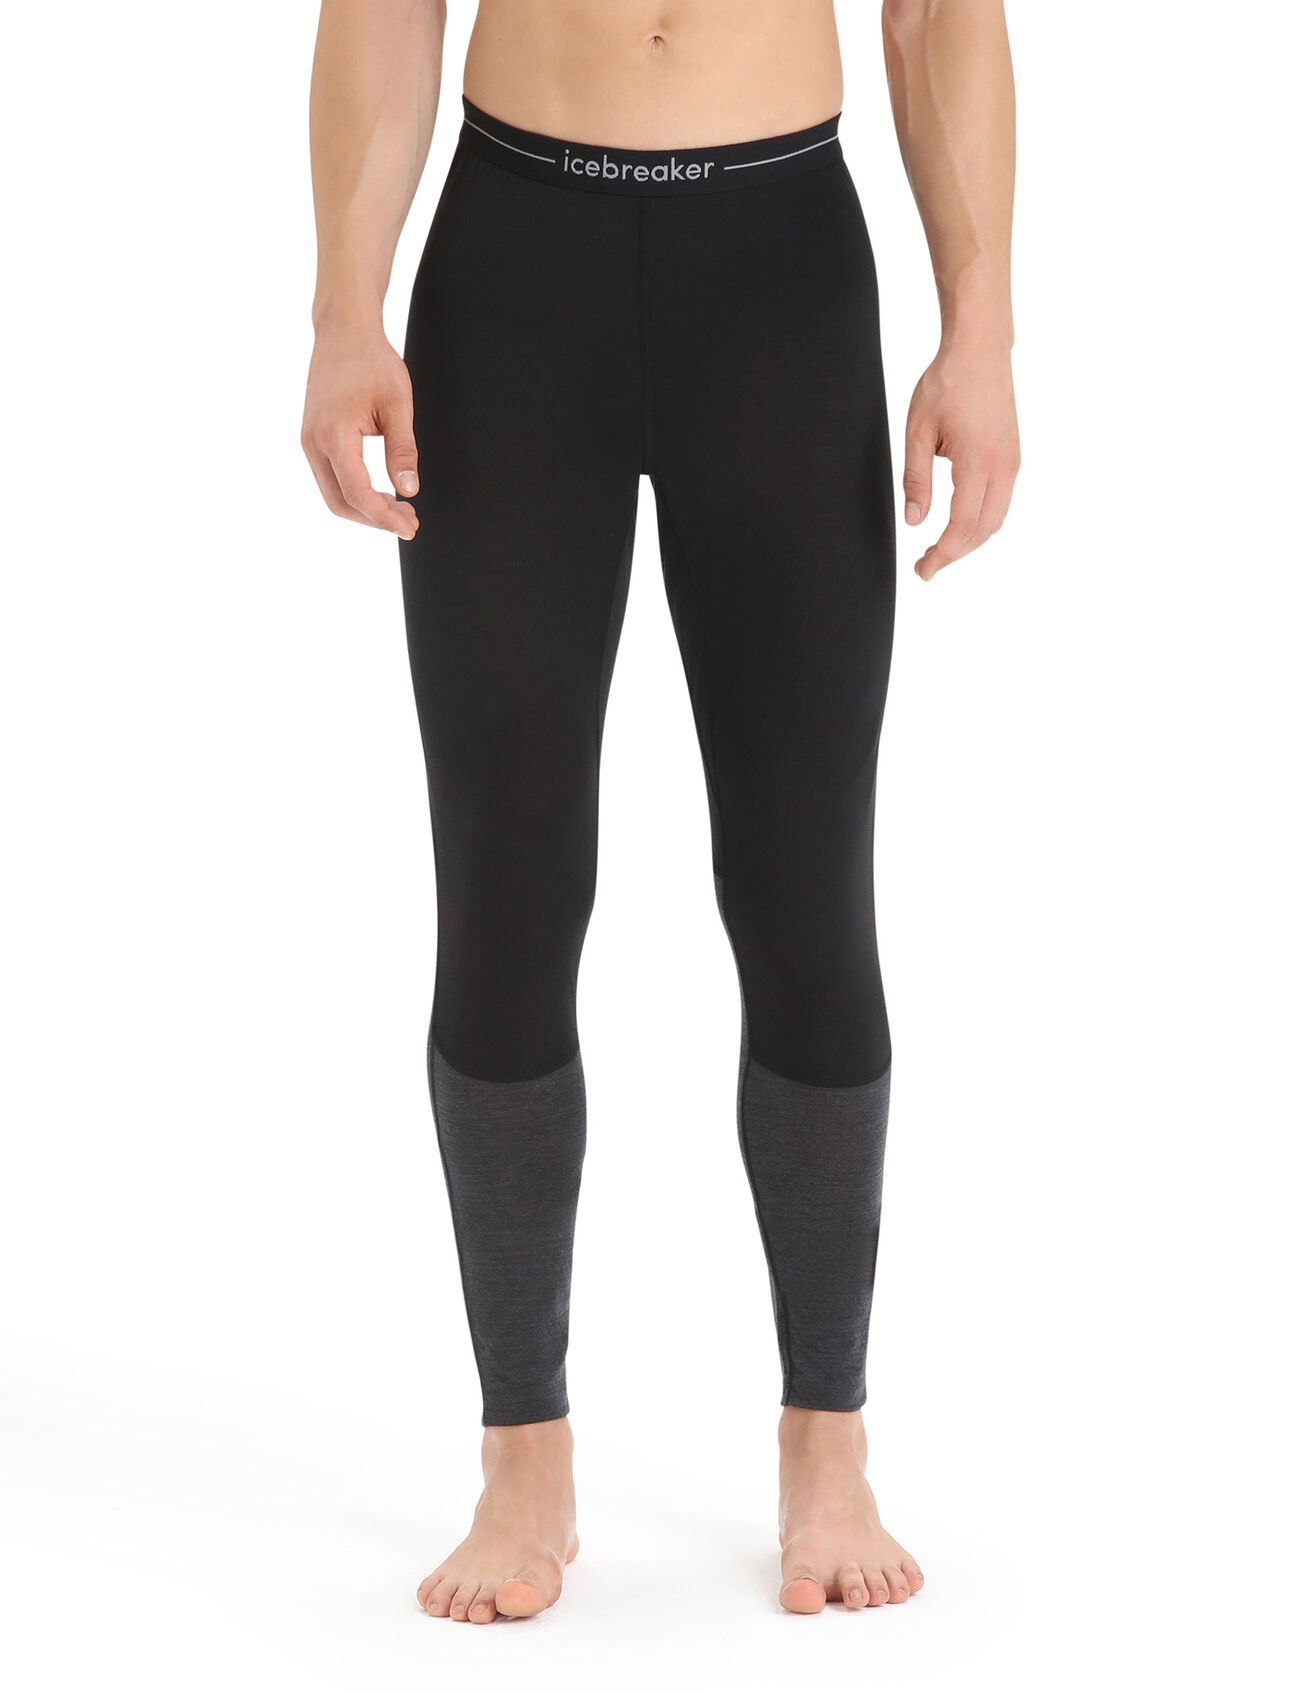 Mens 125 ZoneKnit™ Merino Blend Thermal Leggings Ultralight merino base layer bottoms designed to help regulate body temperature during high-intensity activity, the 125 ZoneKnit™ Leggings feature our jersey Cool-Lite™ fabric for adventure and everyday training.